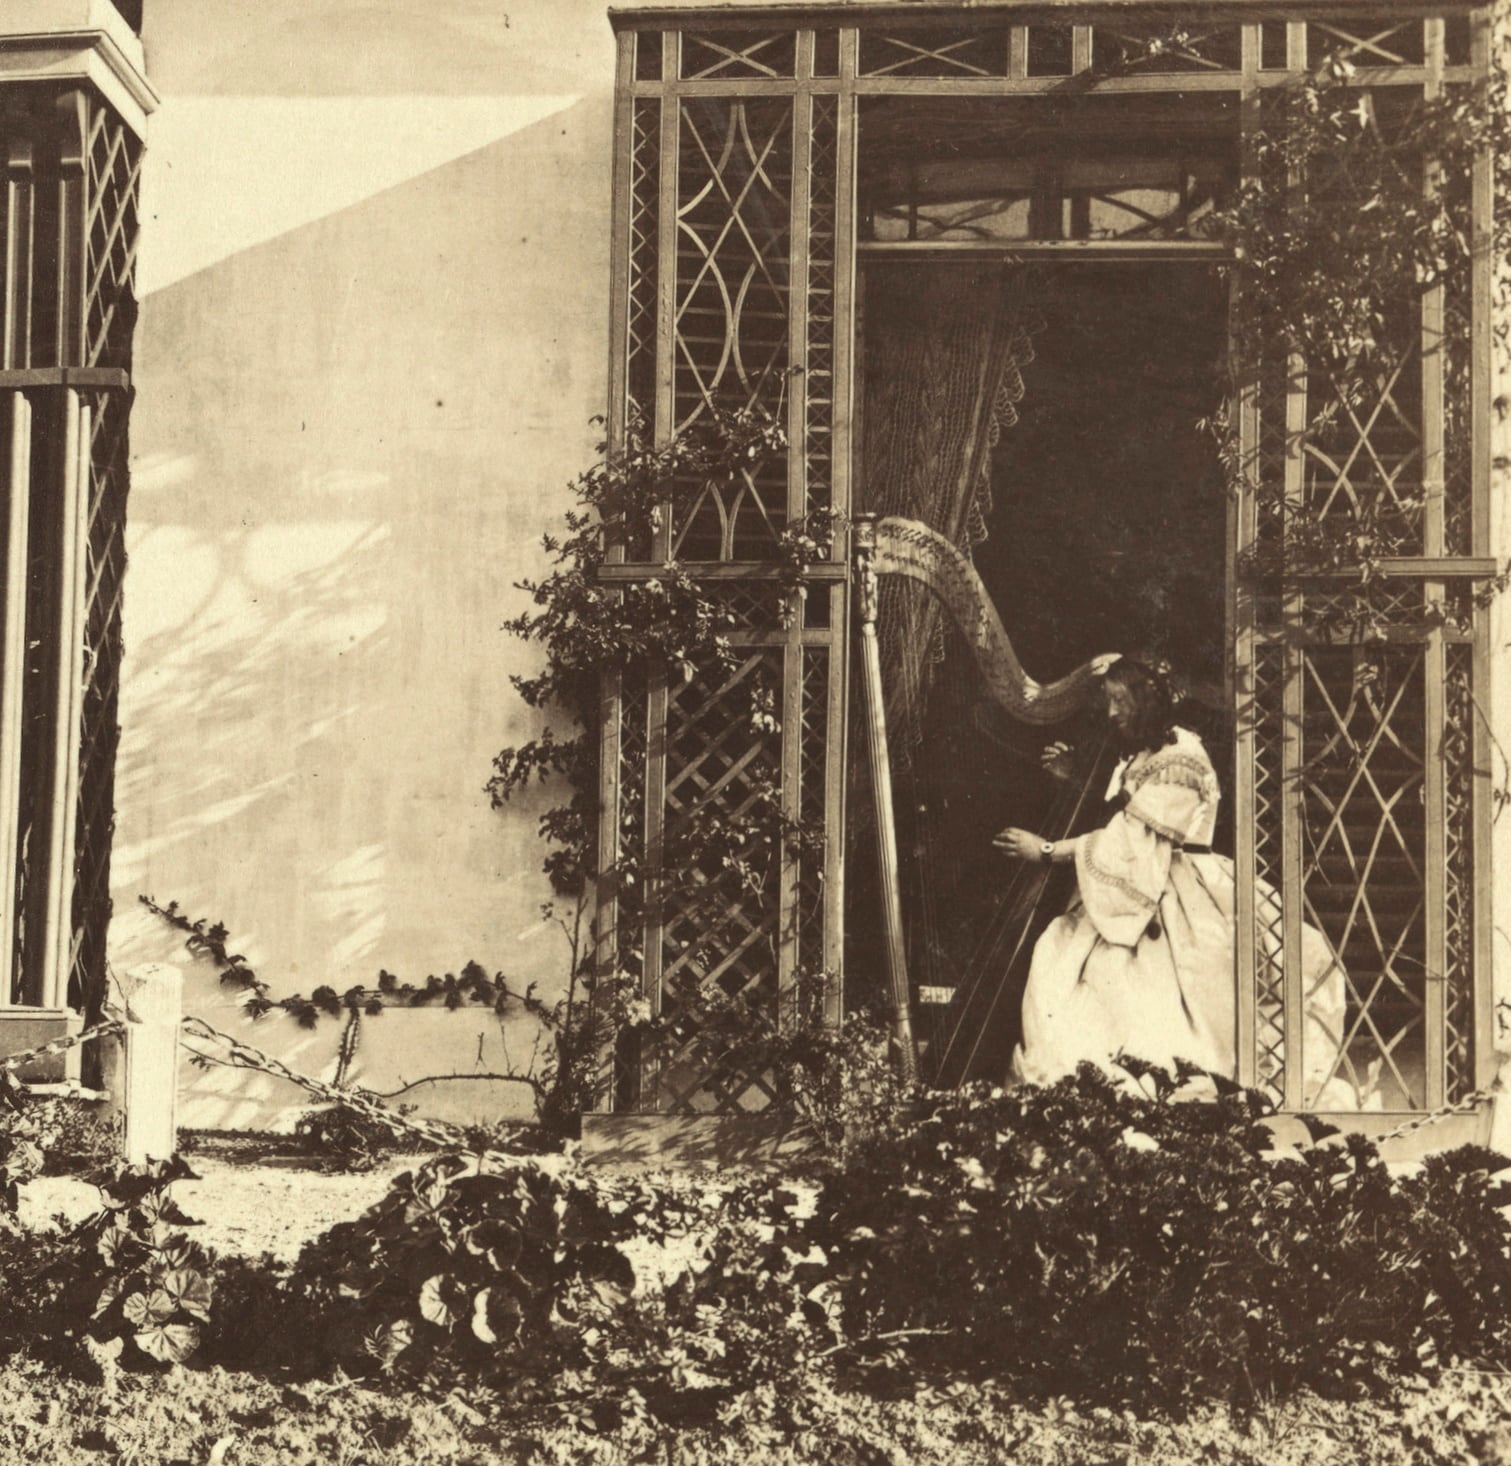 Mary Morton Allport playing the harp at Aldridge Lodge, c. 1860s (detail); Tasmanian Archive and Heritage Office